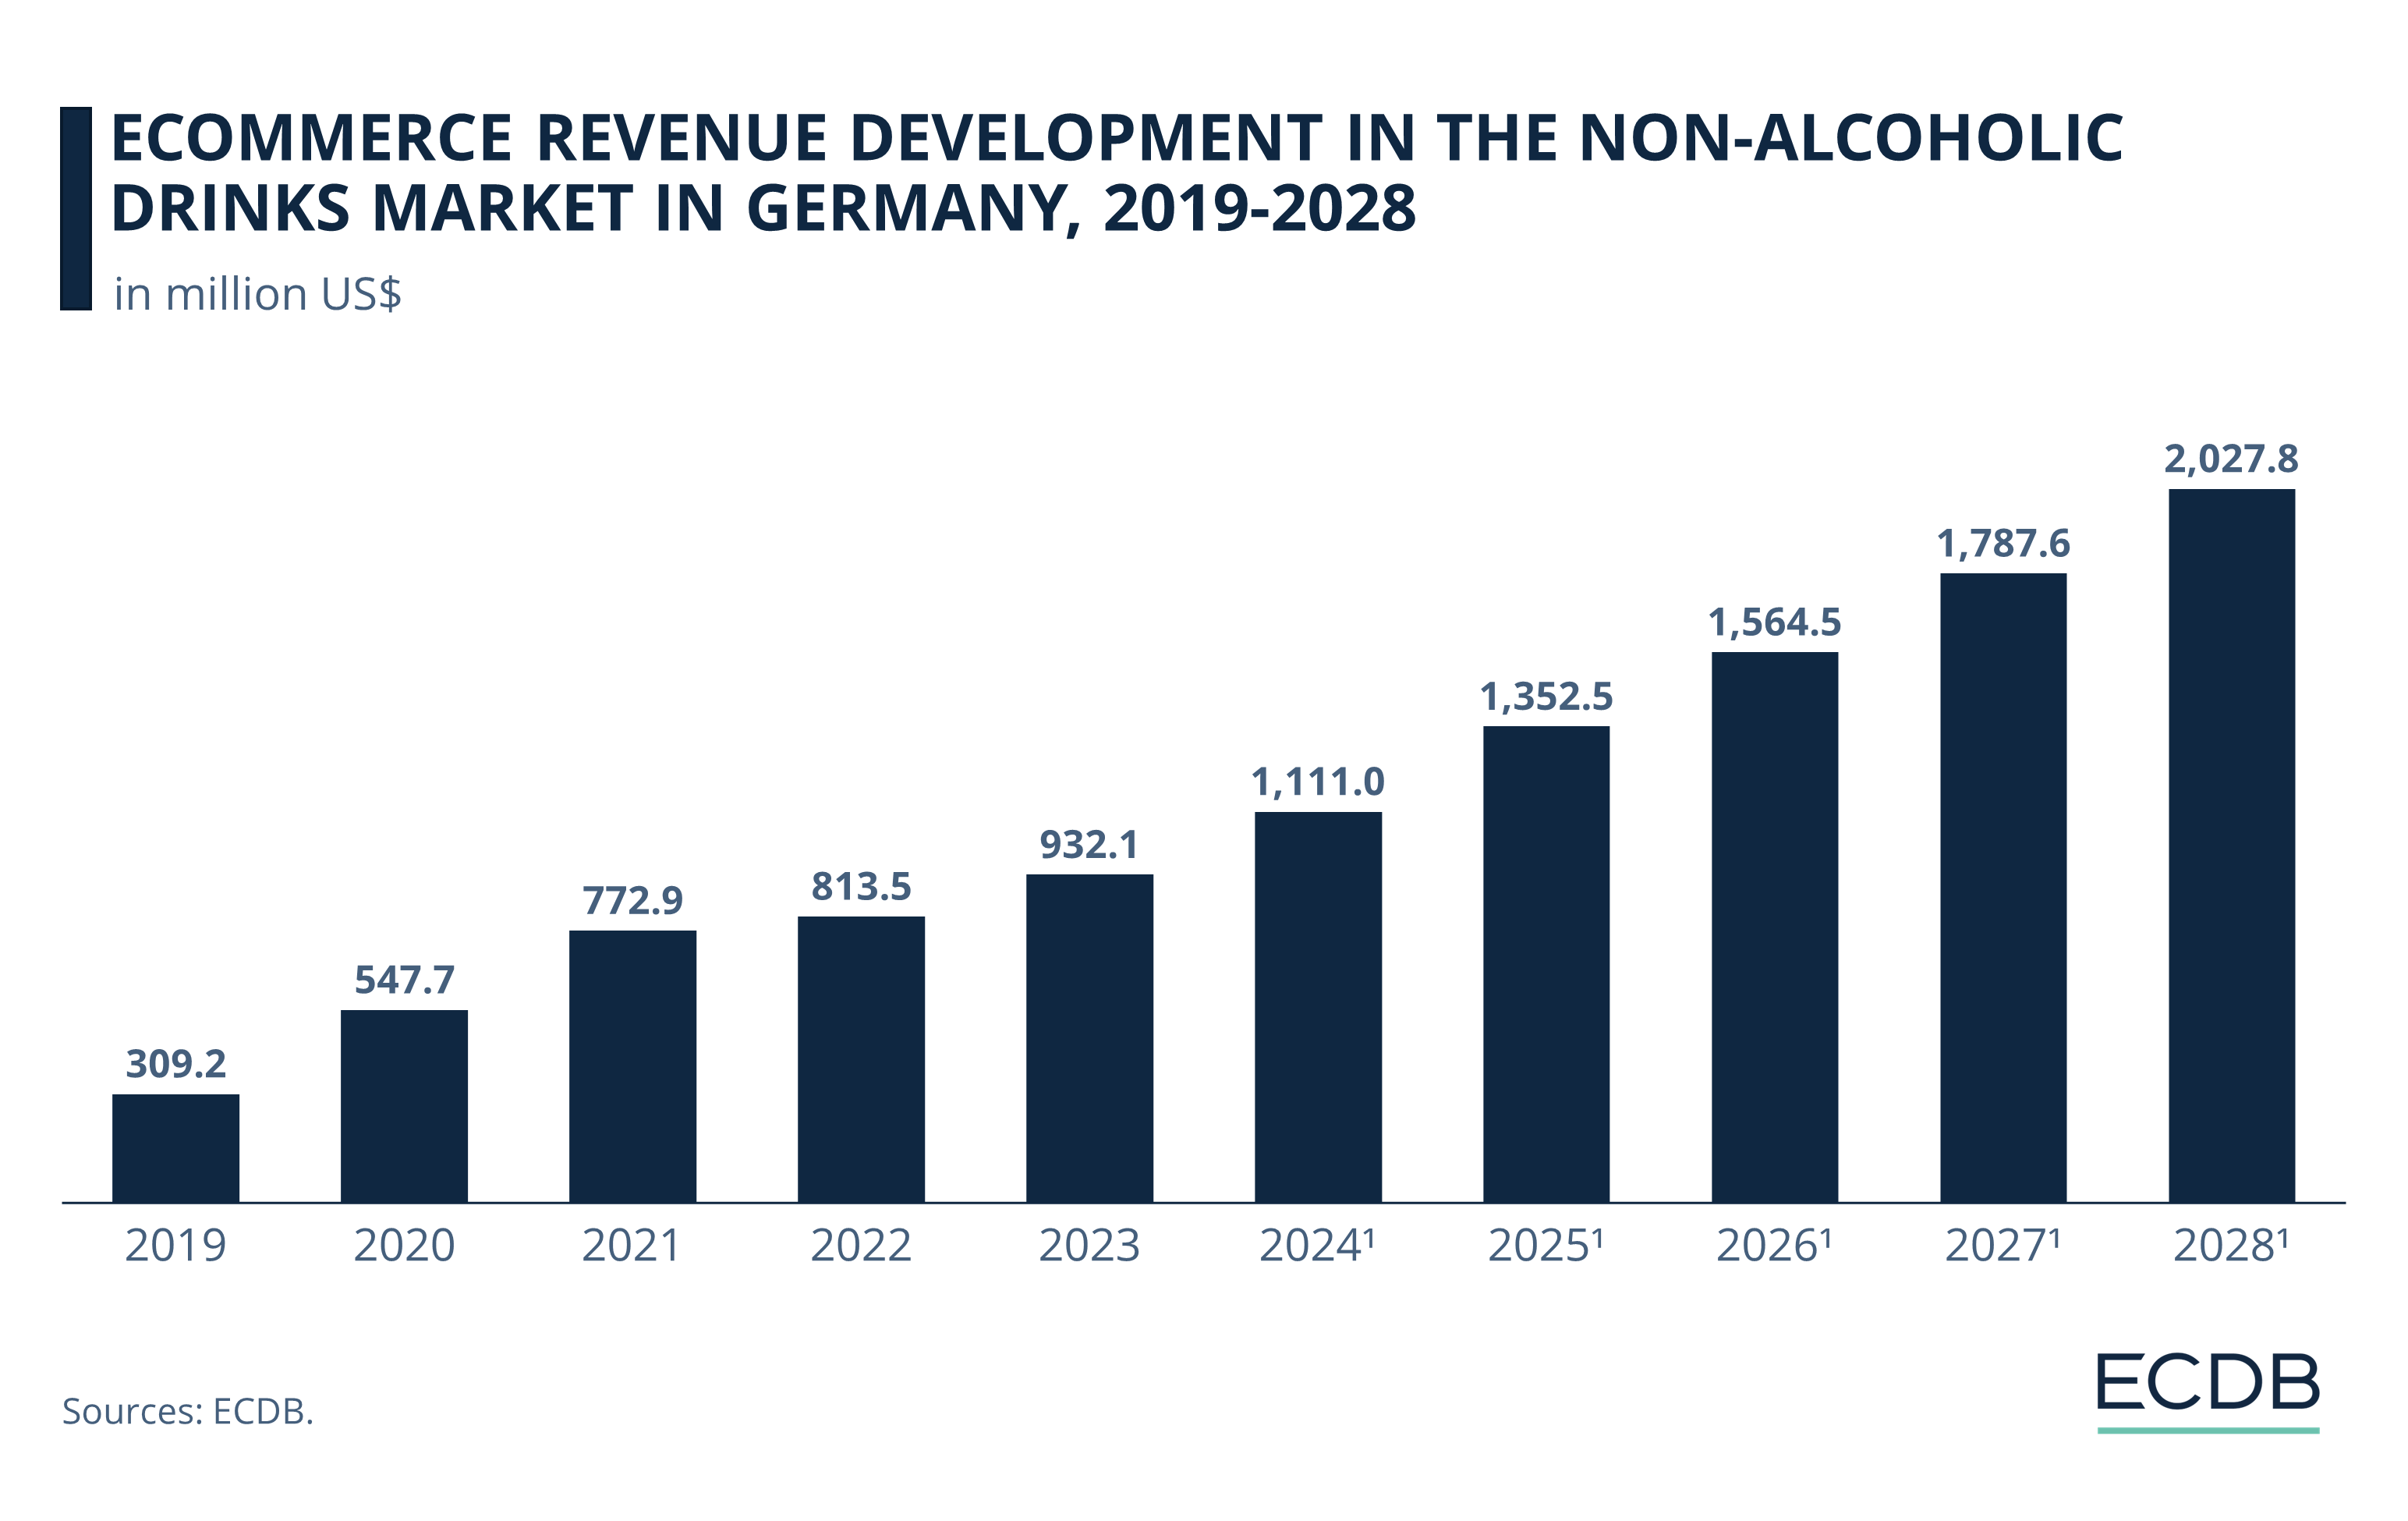 eCommerce Revenue Development in the Non-Alcoholic Drinks Market in Germany, 2019-2028